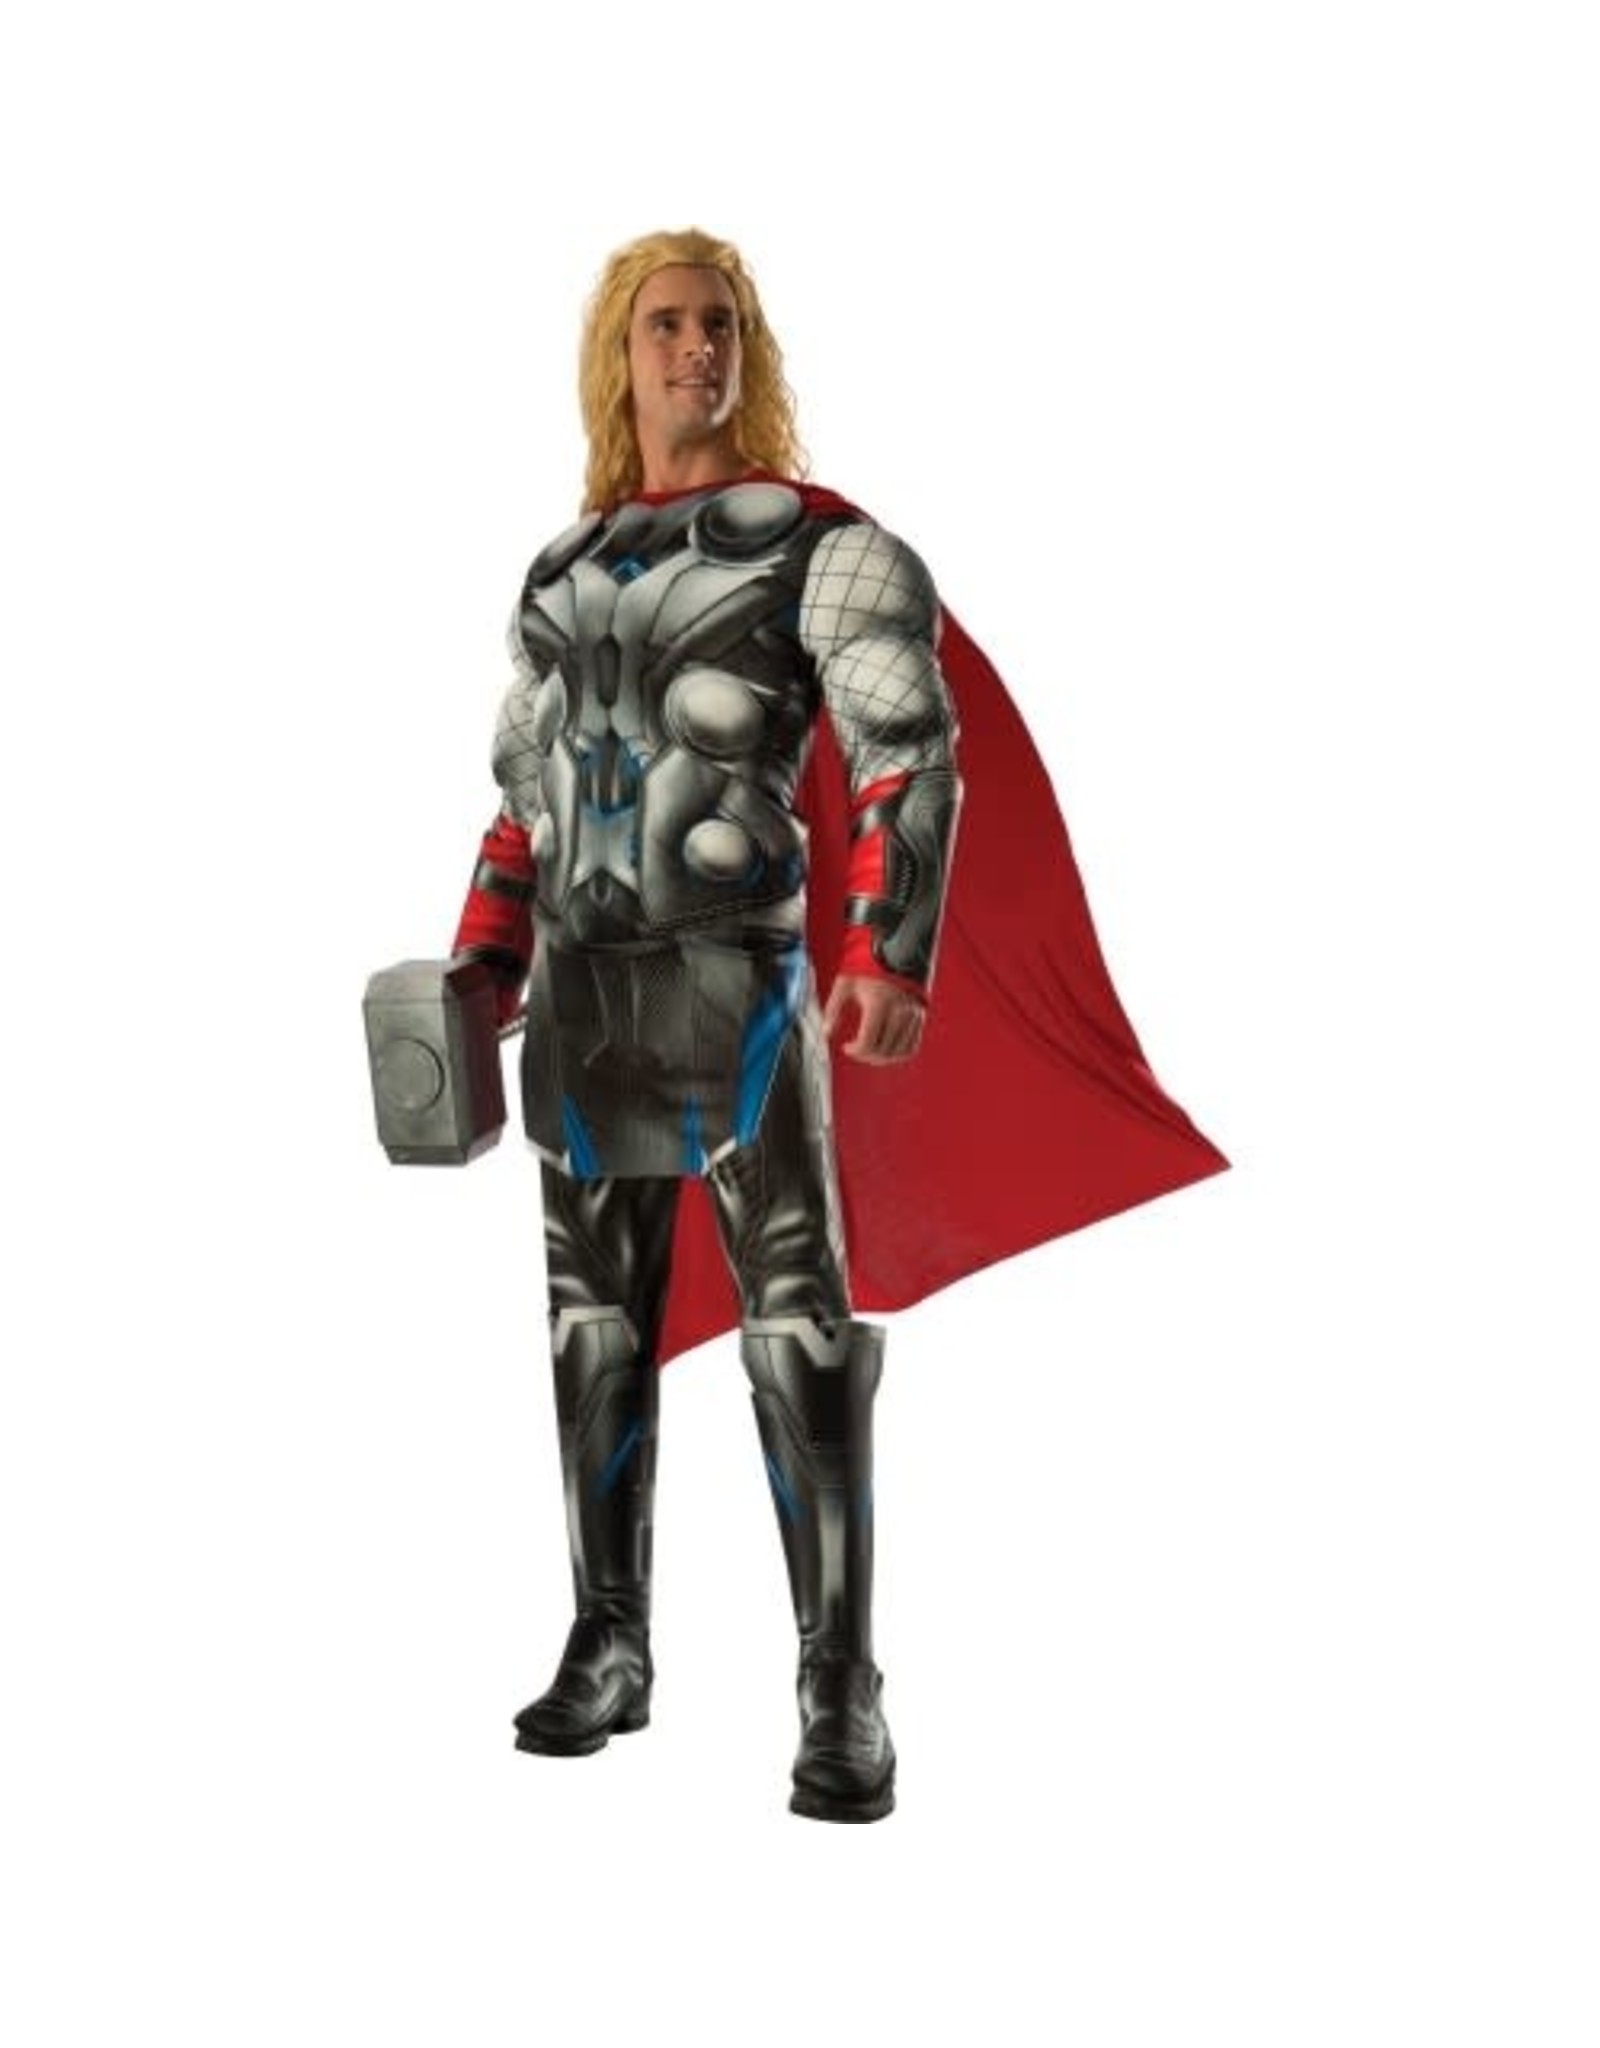 Disguise Inc Thor